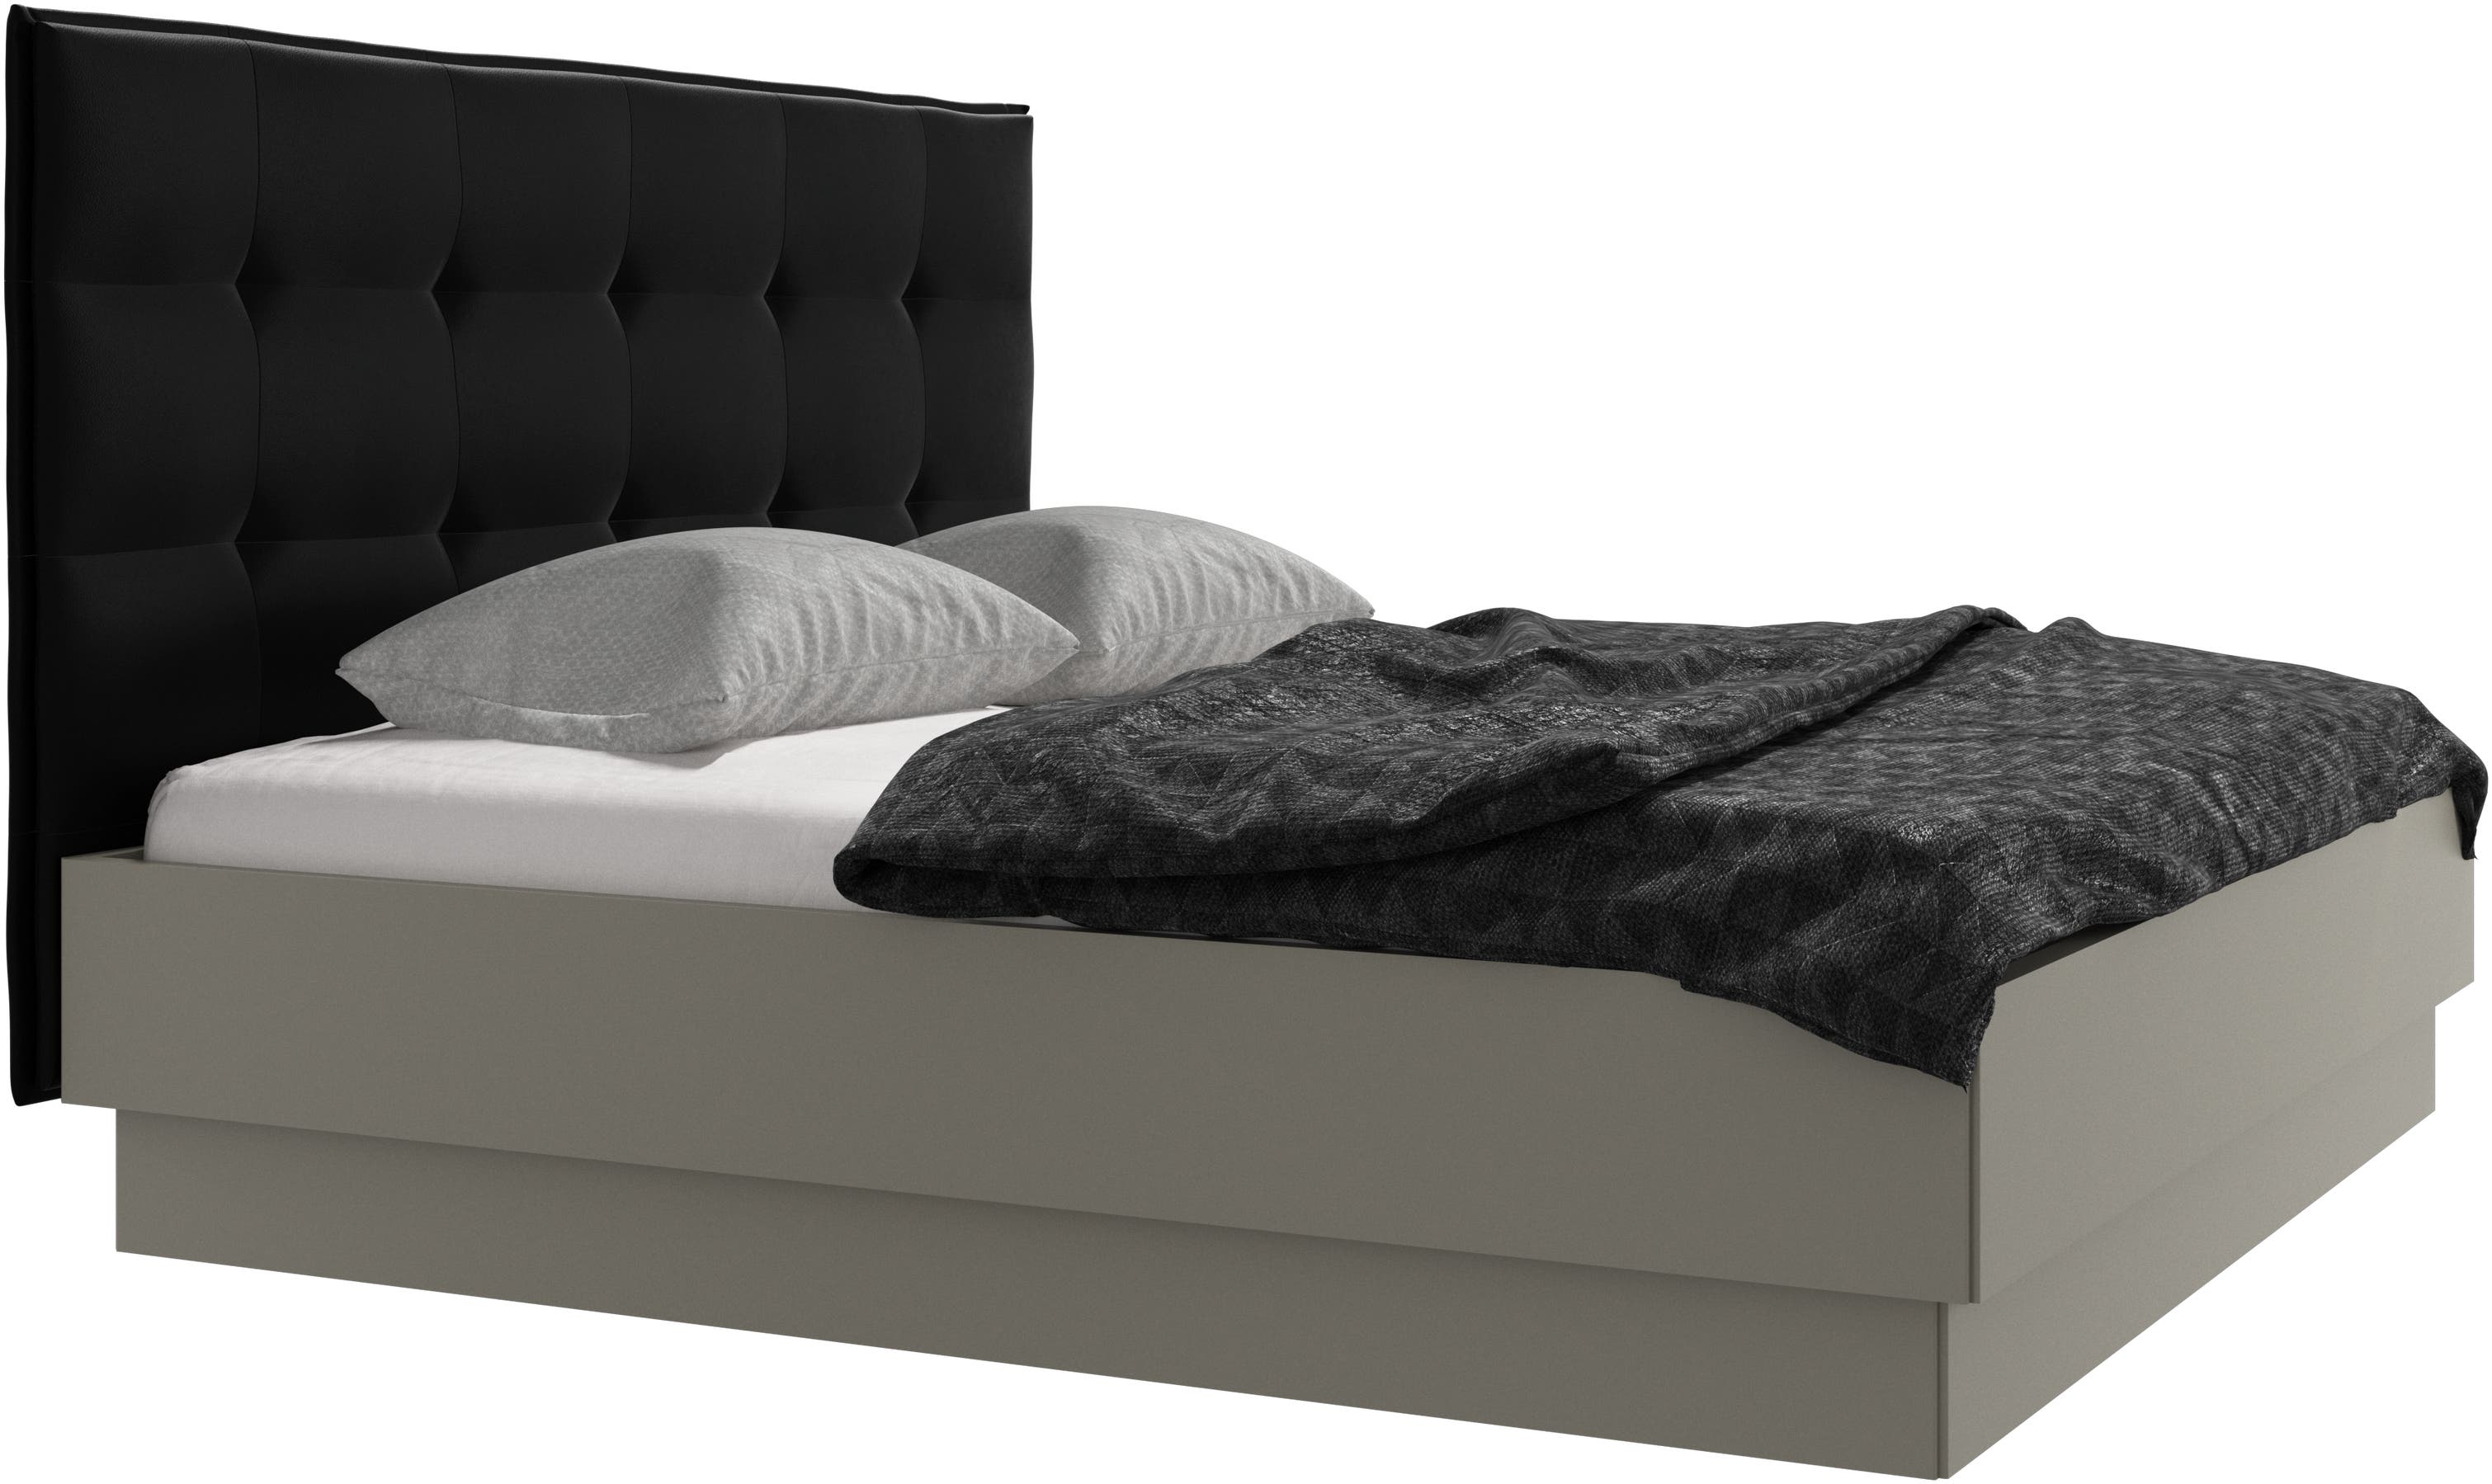 Lugano storage bed with lift-up frame and slats, excl. mattress